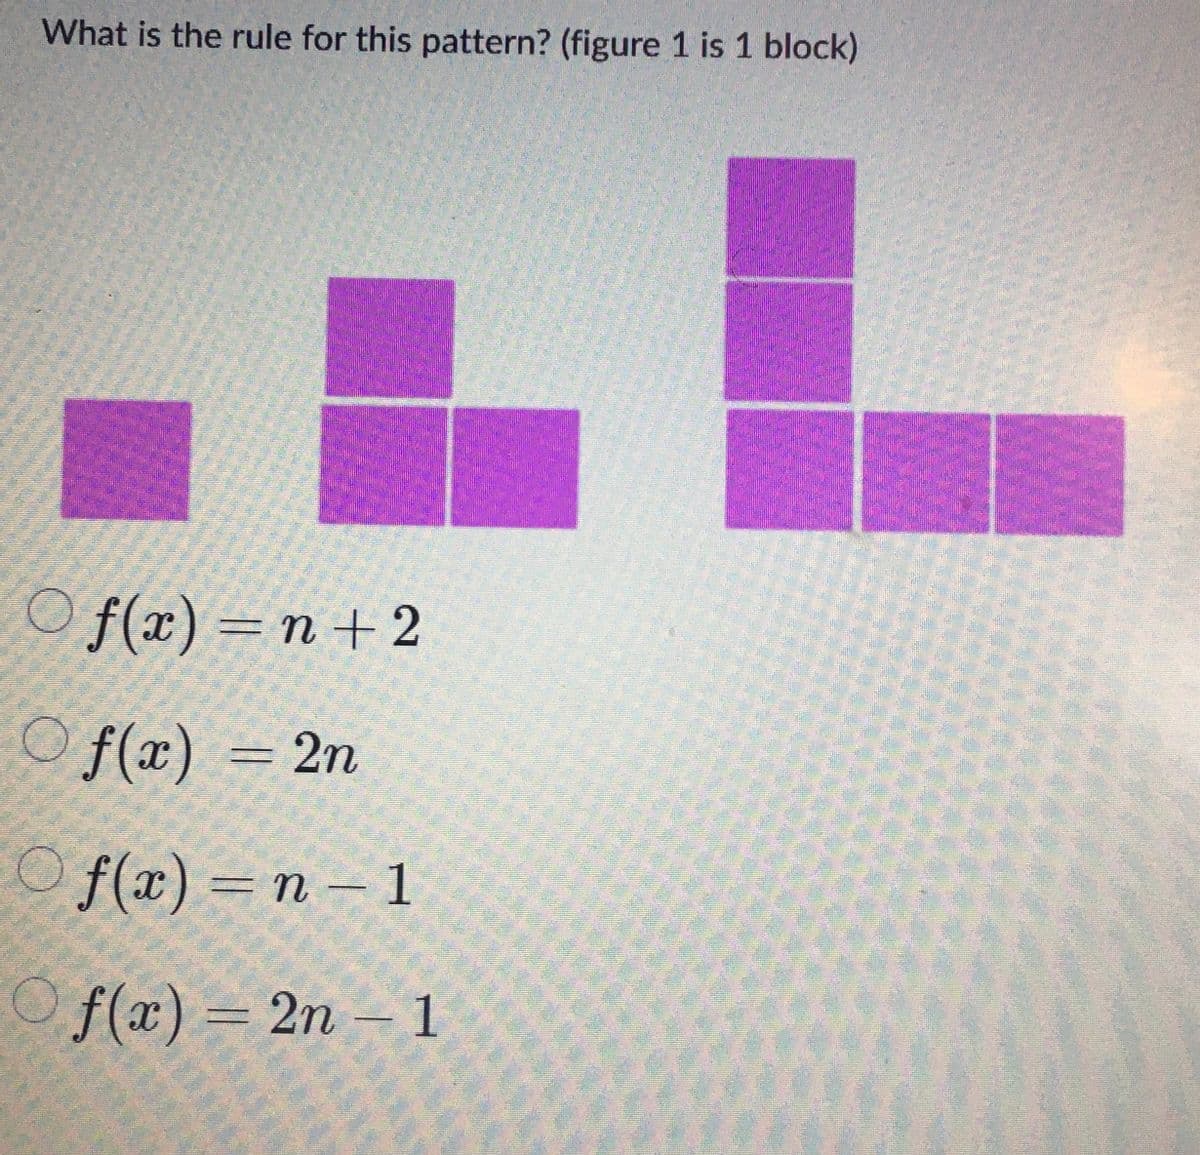 What is the rule for this pattern? (figure 1 is 1 block)
Of(x)=n+2
Of(x) = 2n
Of(x)=n-1
Of(x) = 2n-1